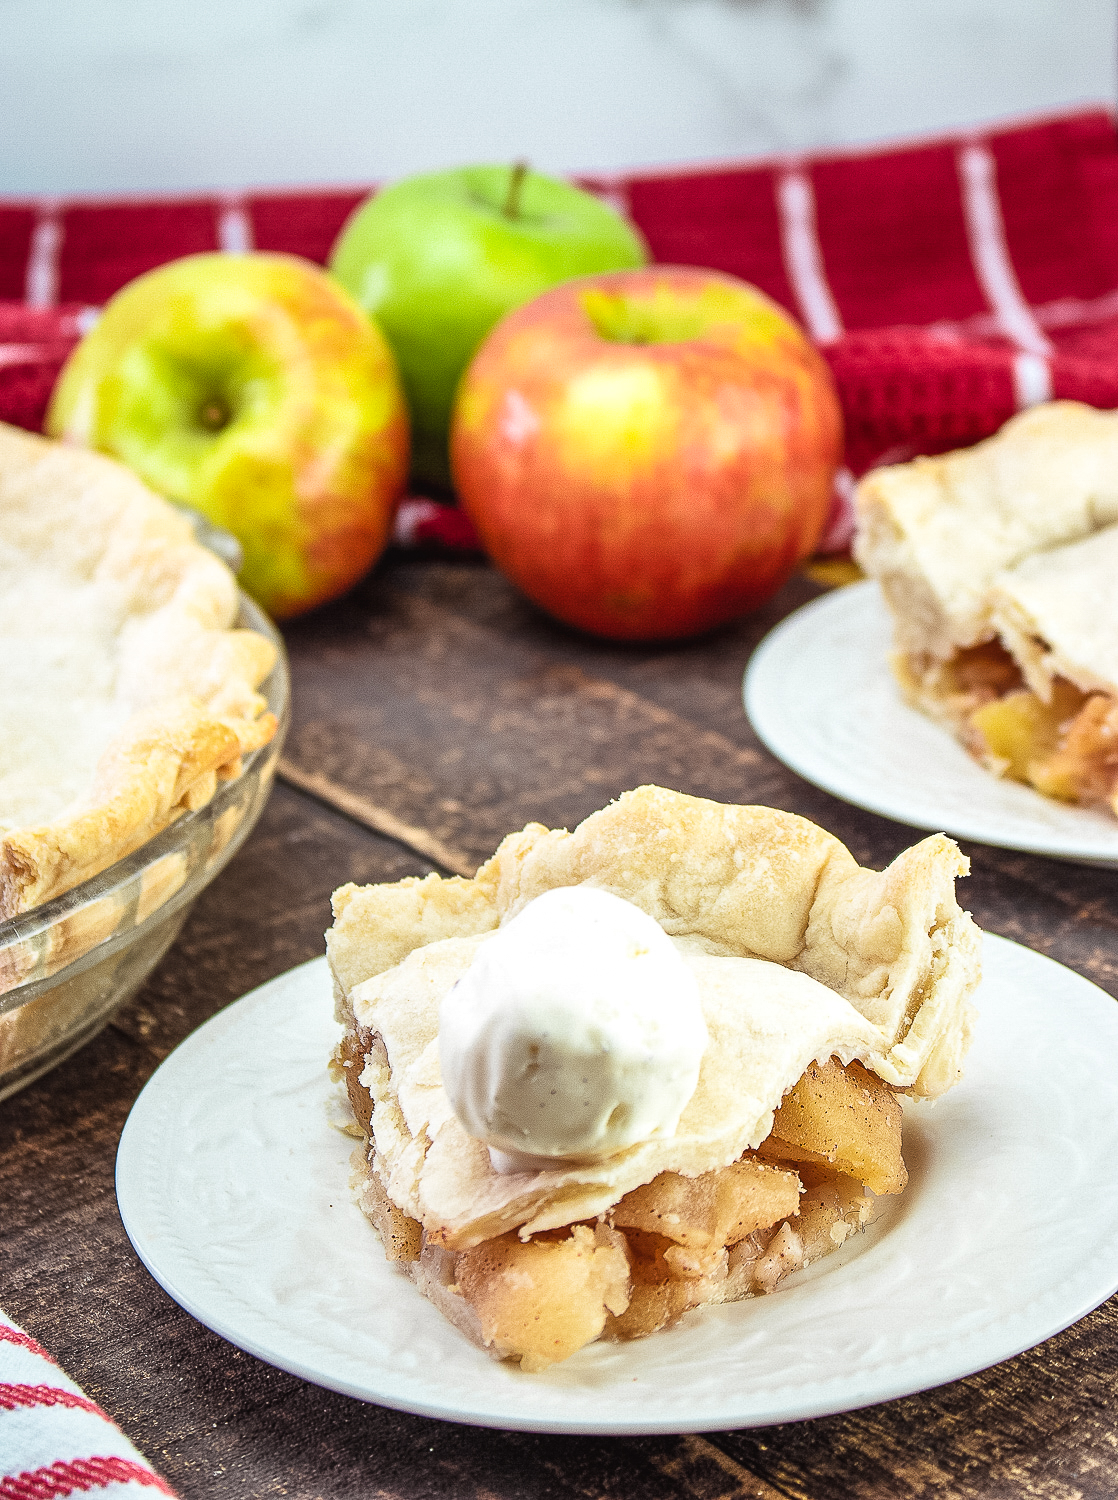 This delicious and easy recipe for Apple Pie a la Mode will be a hit for any occasion! Here's our recipe for an all-American classic dessert.